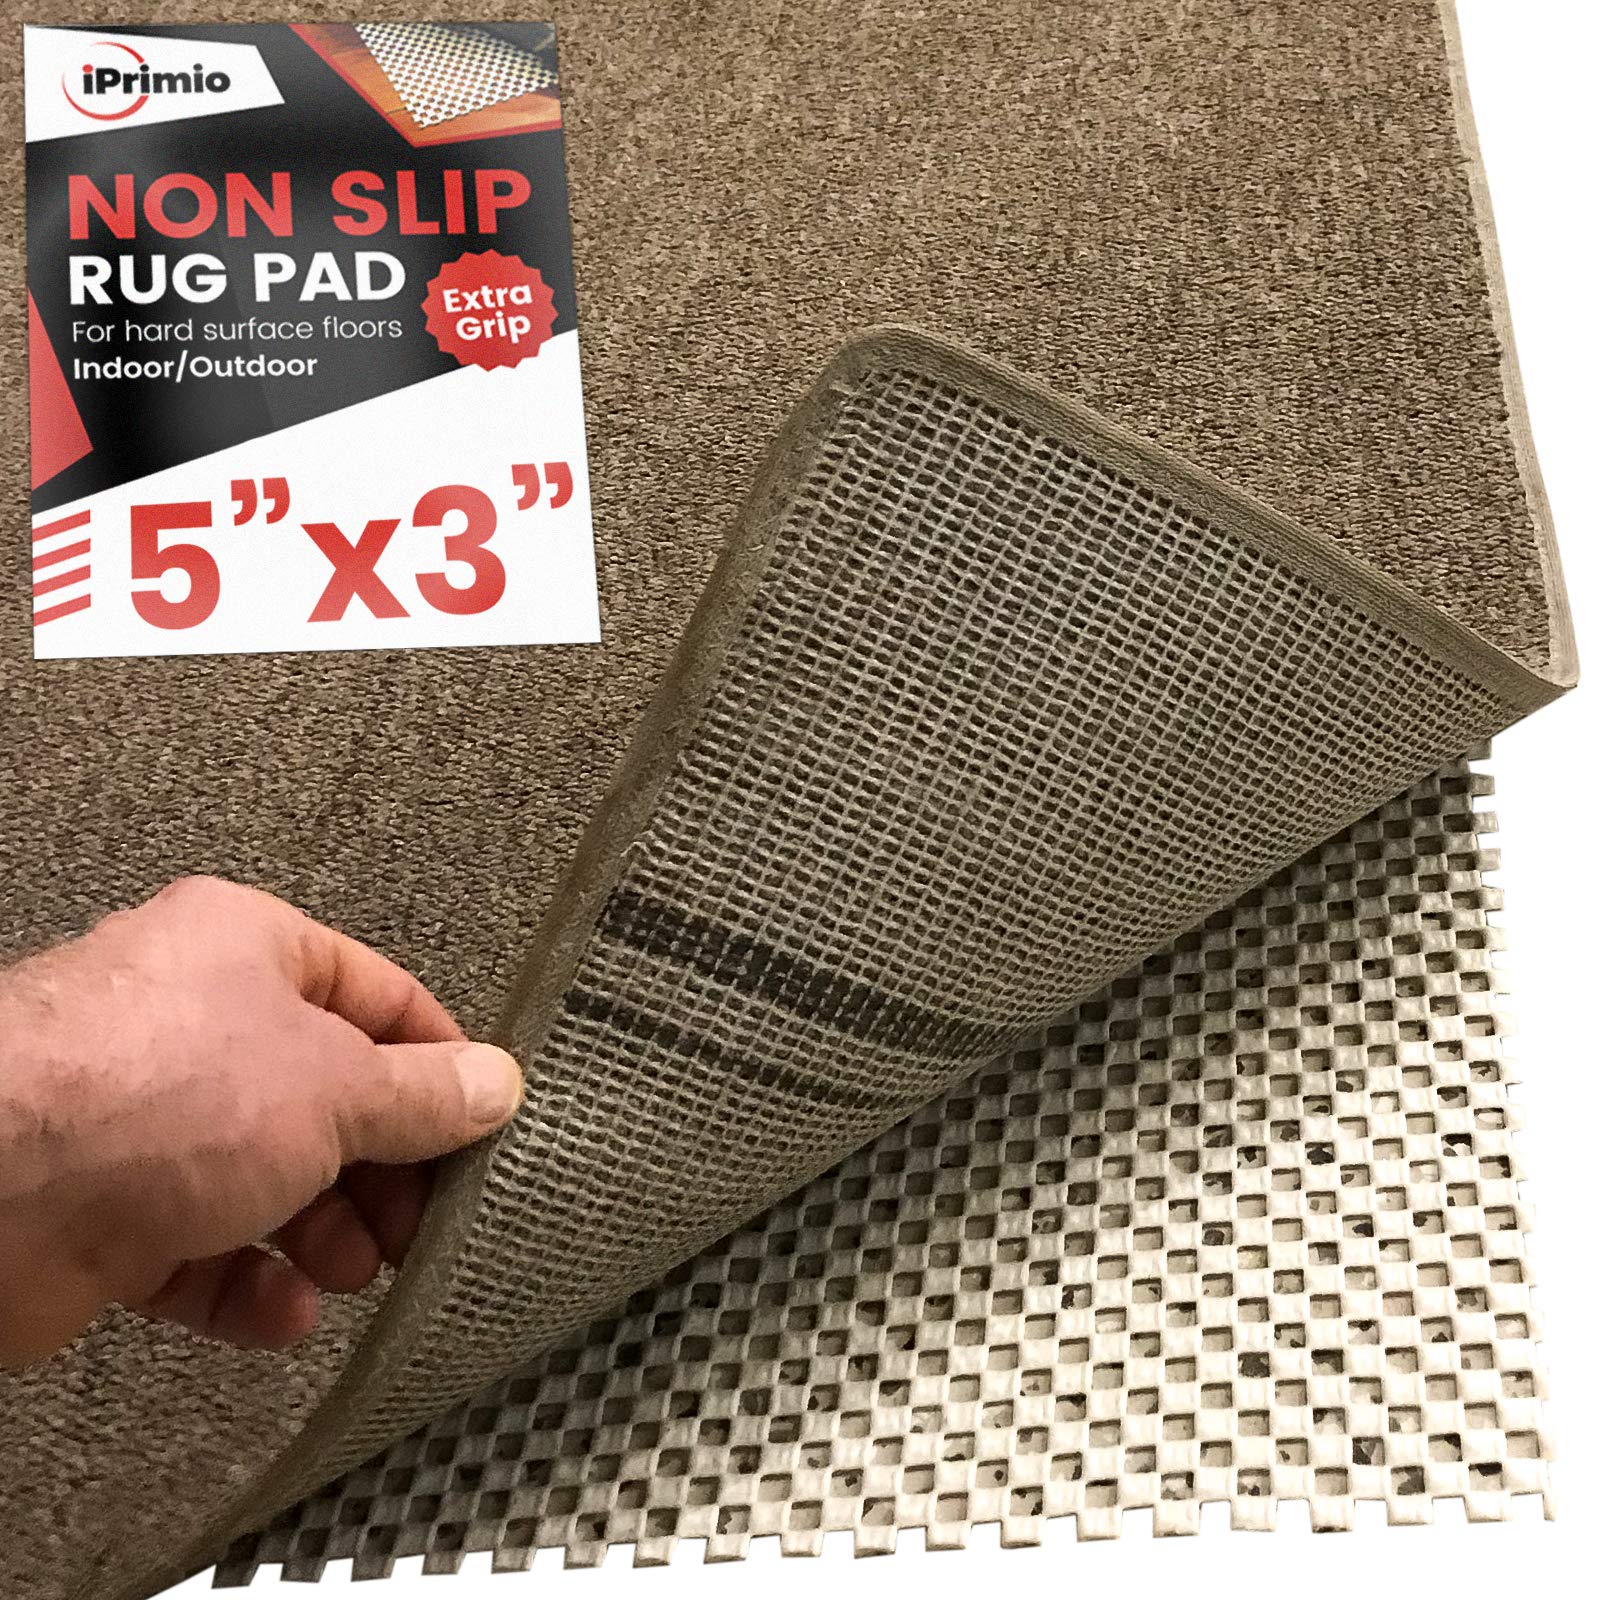 iPrimio Non Slip Rug Pad for Bathroom, Kitchen and Outdoor Area - Extra Grip for Hard Surface Floors  - Very Good